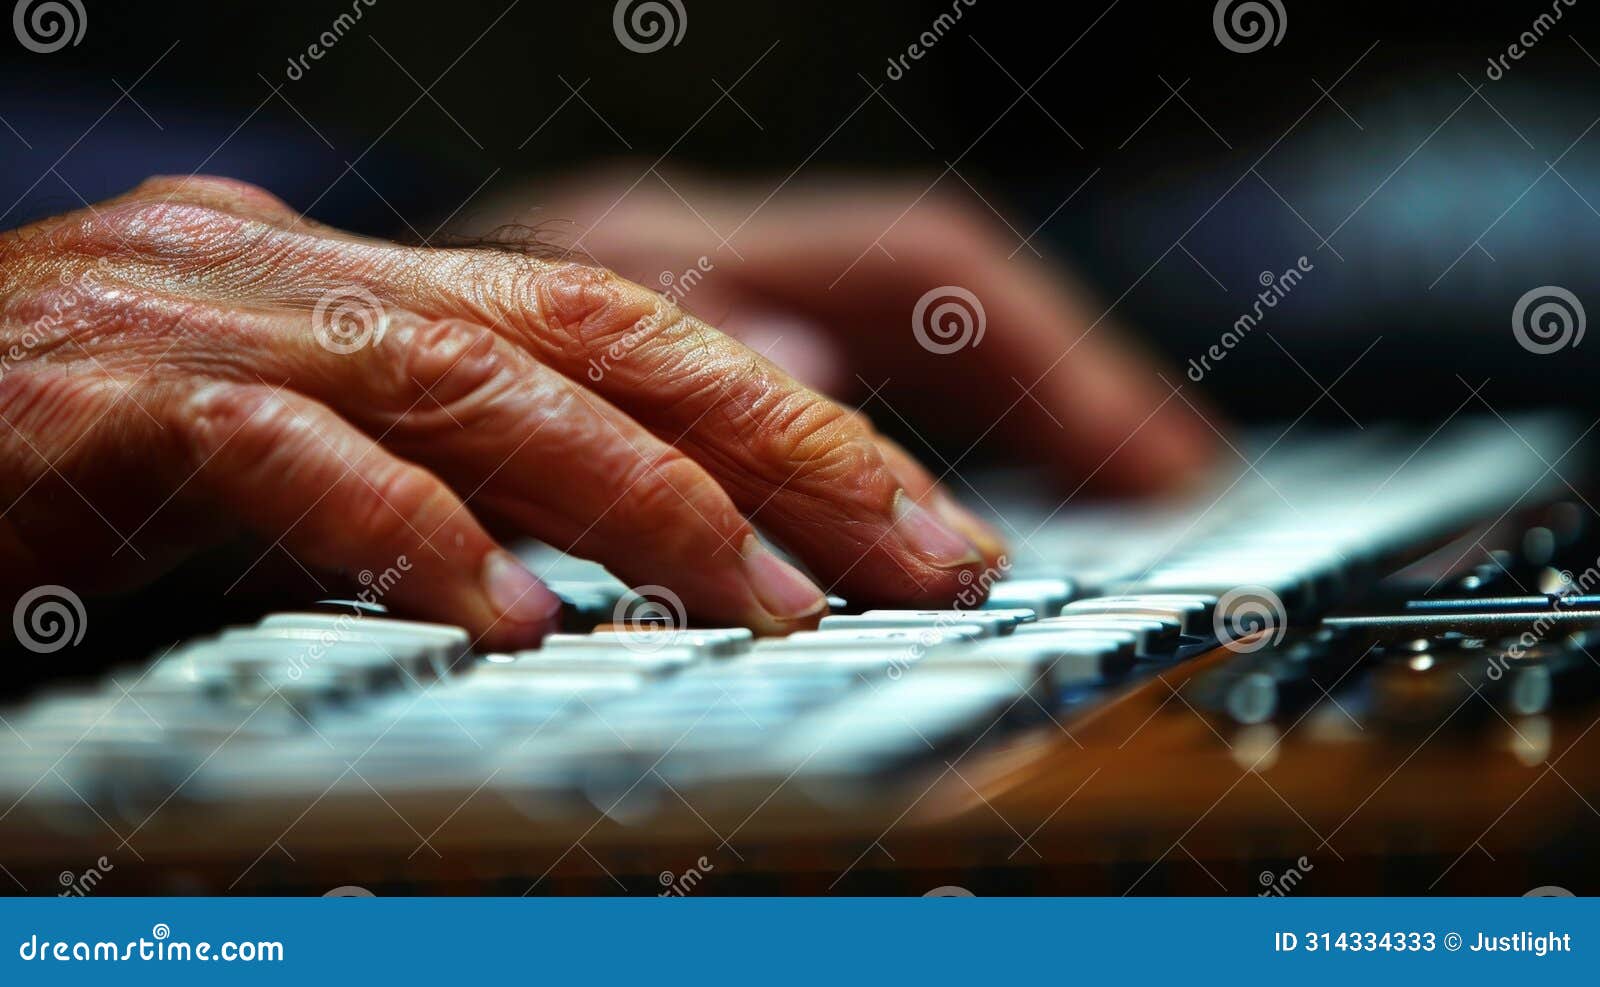 a typists fingers glide effortlessly across a keyboard typing with speed and accuracy like a virtuoso dancer on stage.